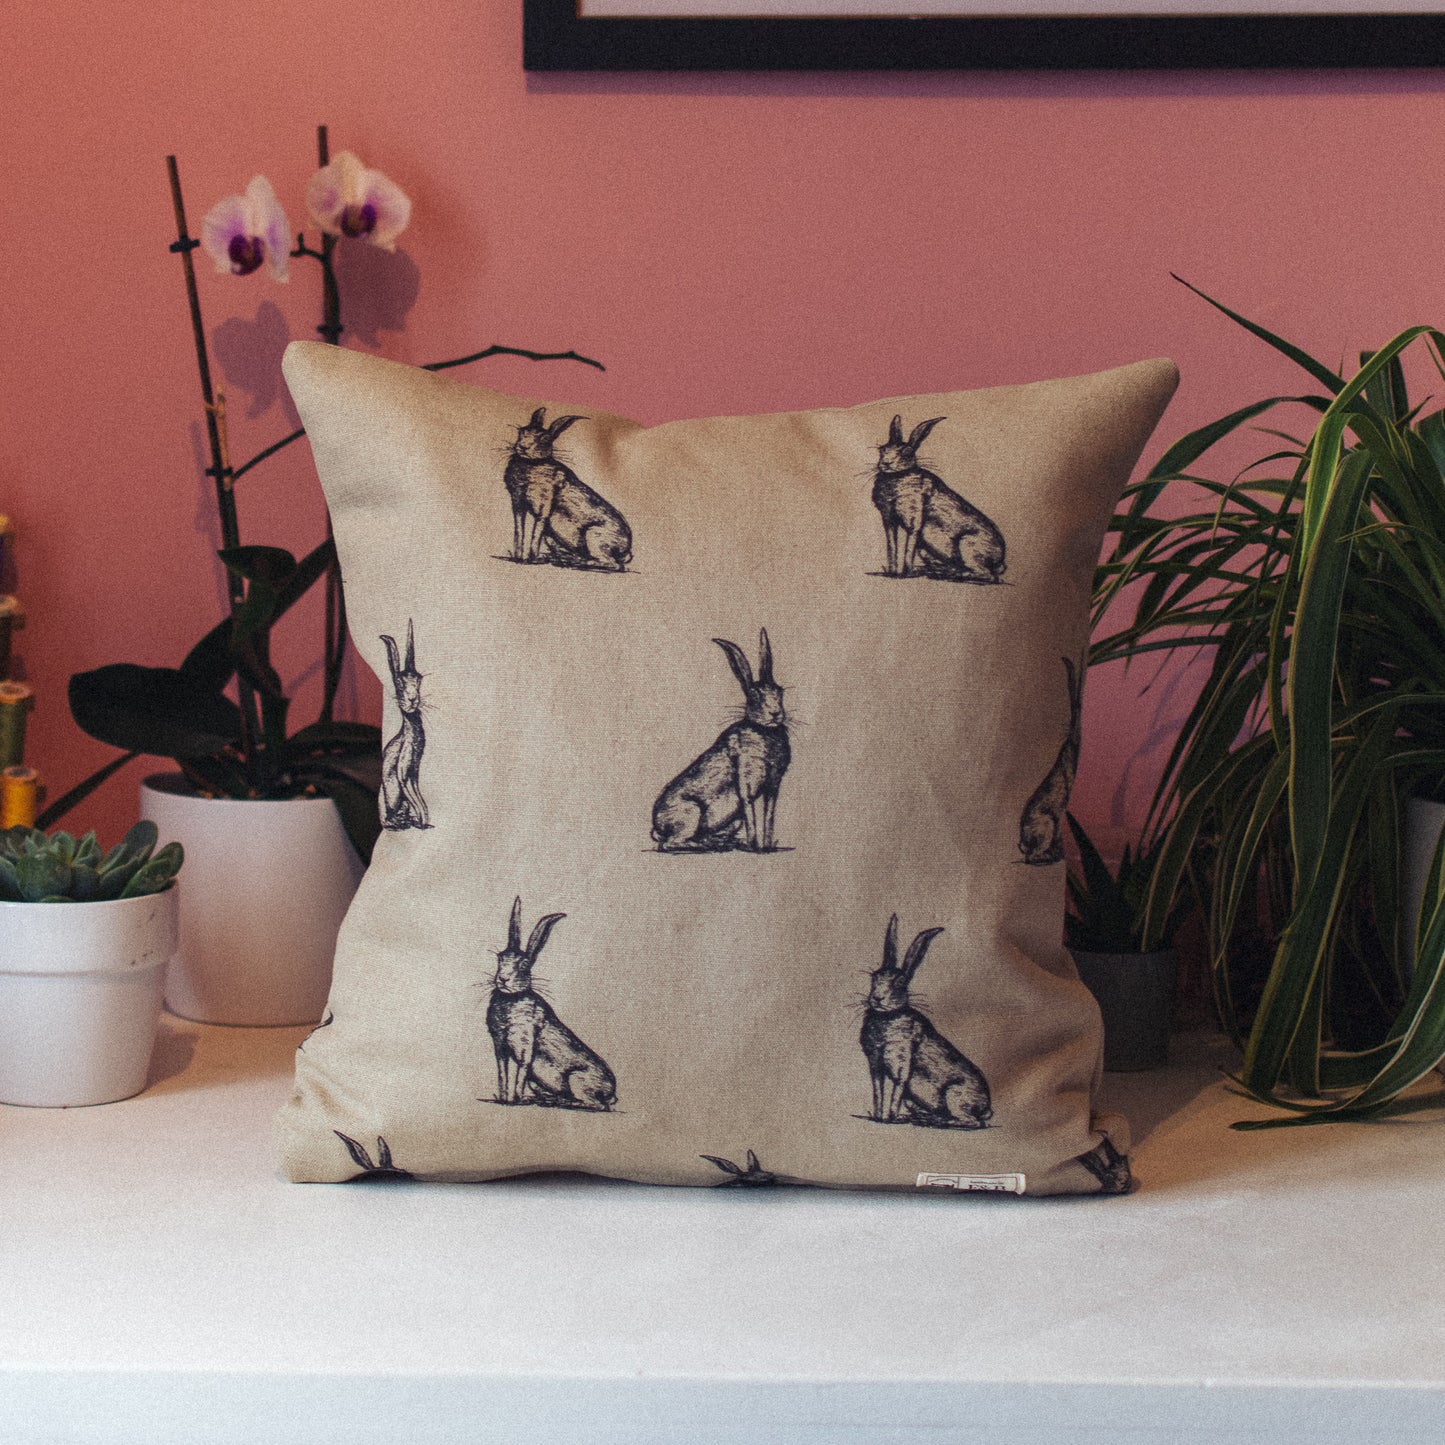 F&B Crafts - Hare Print Cushion against pink wall and green leaves